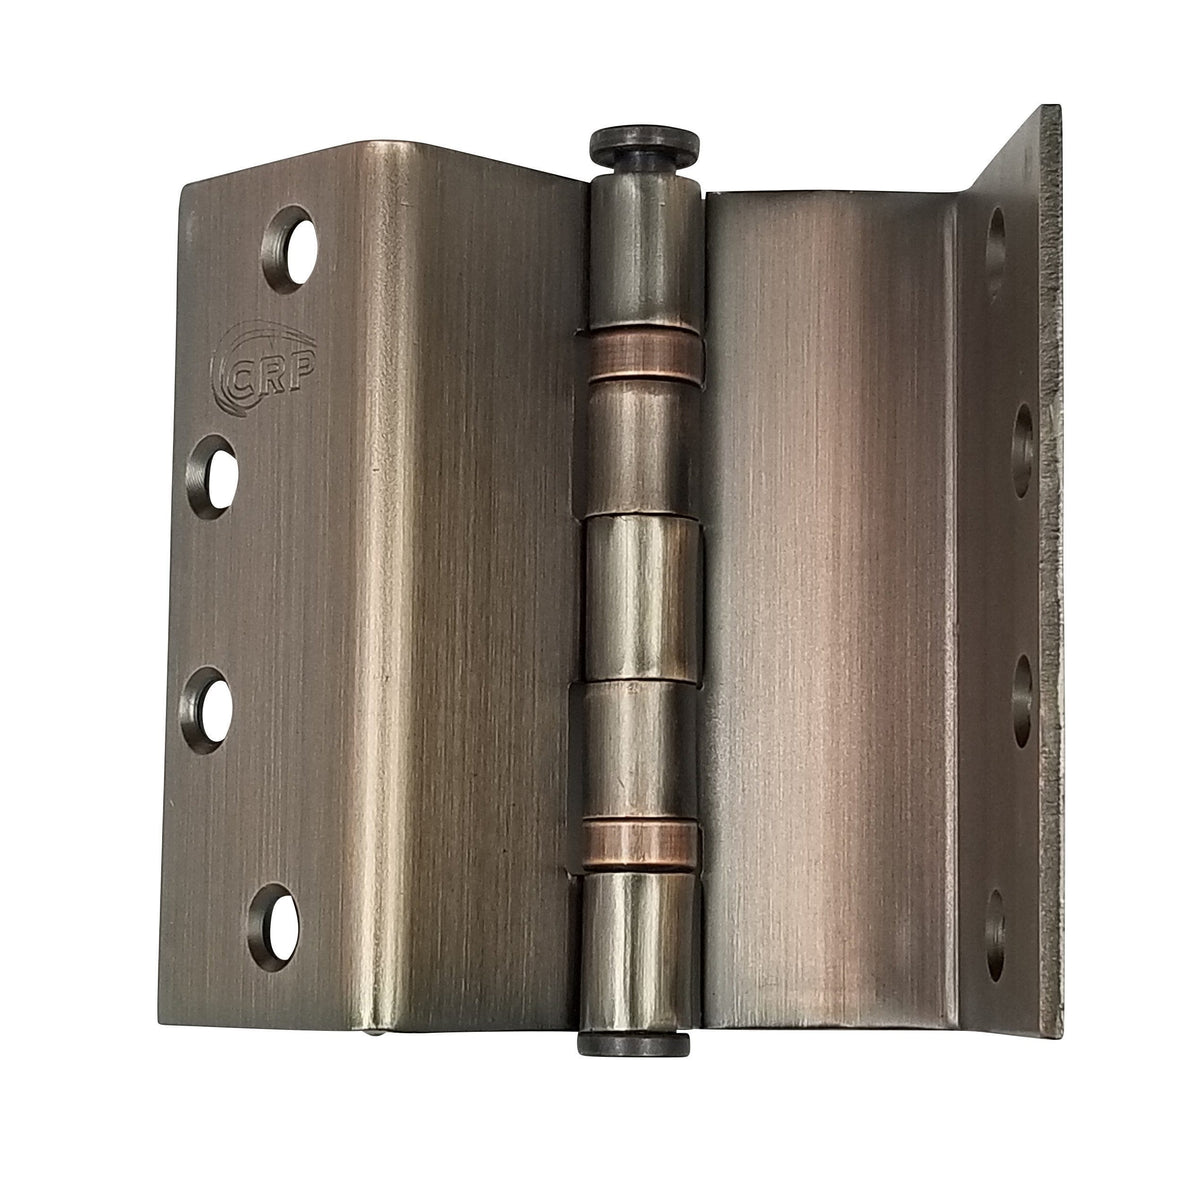 Swing Clear Hinges - Swing Clear Standard Weight Ball Bearing Door Hinges - 4.5" - Full Mortise - Antique Bronze - Sold Individually